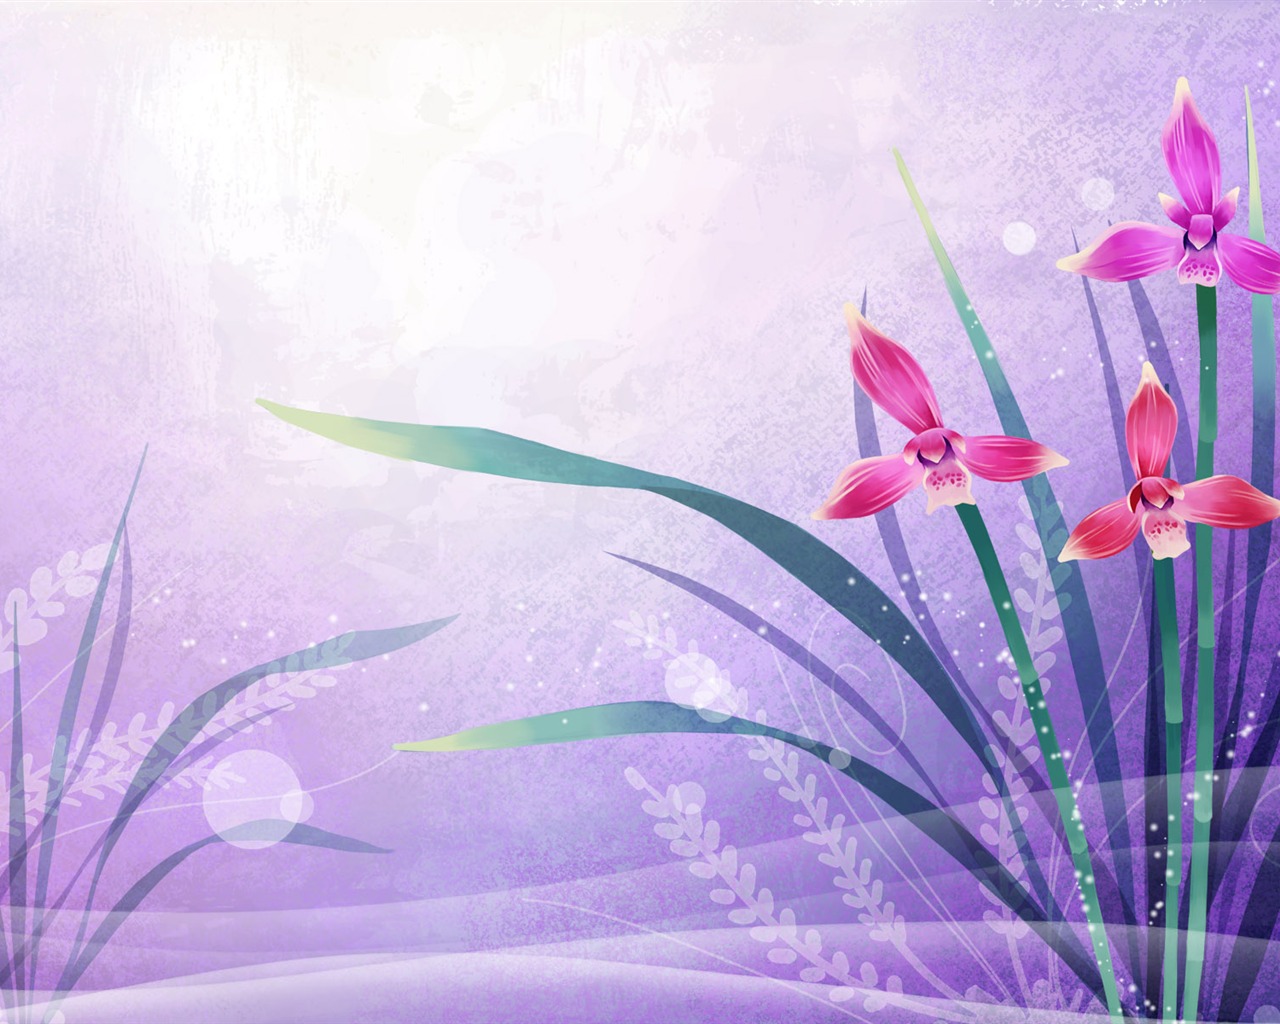 Synthetic Wallpaper Colorful Flower #37 - 1280x1024